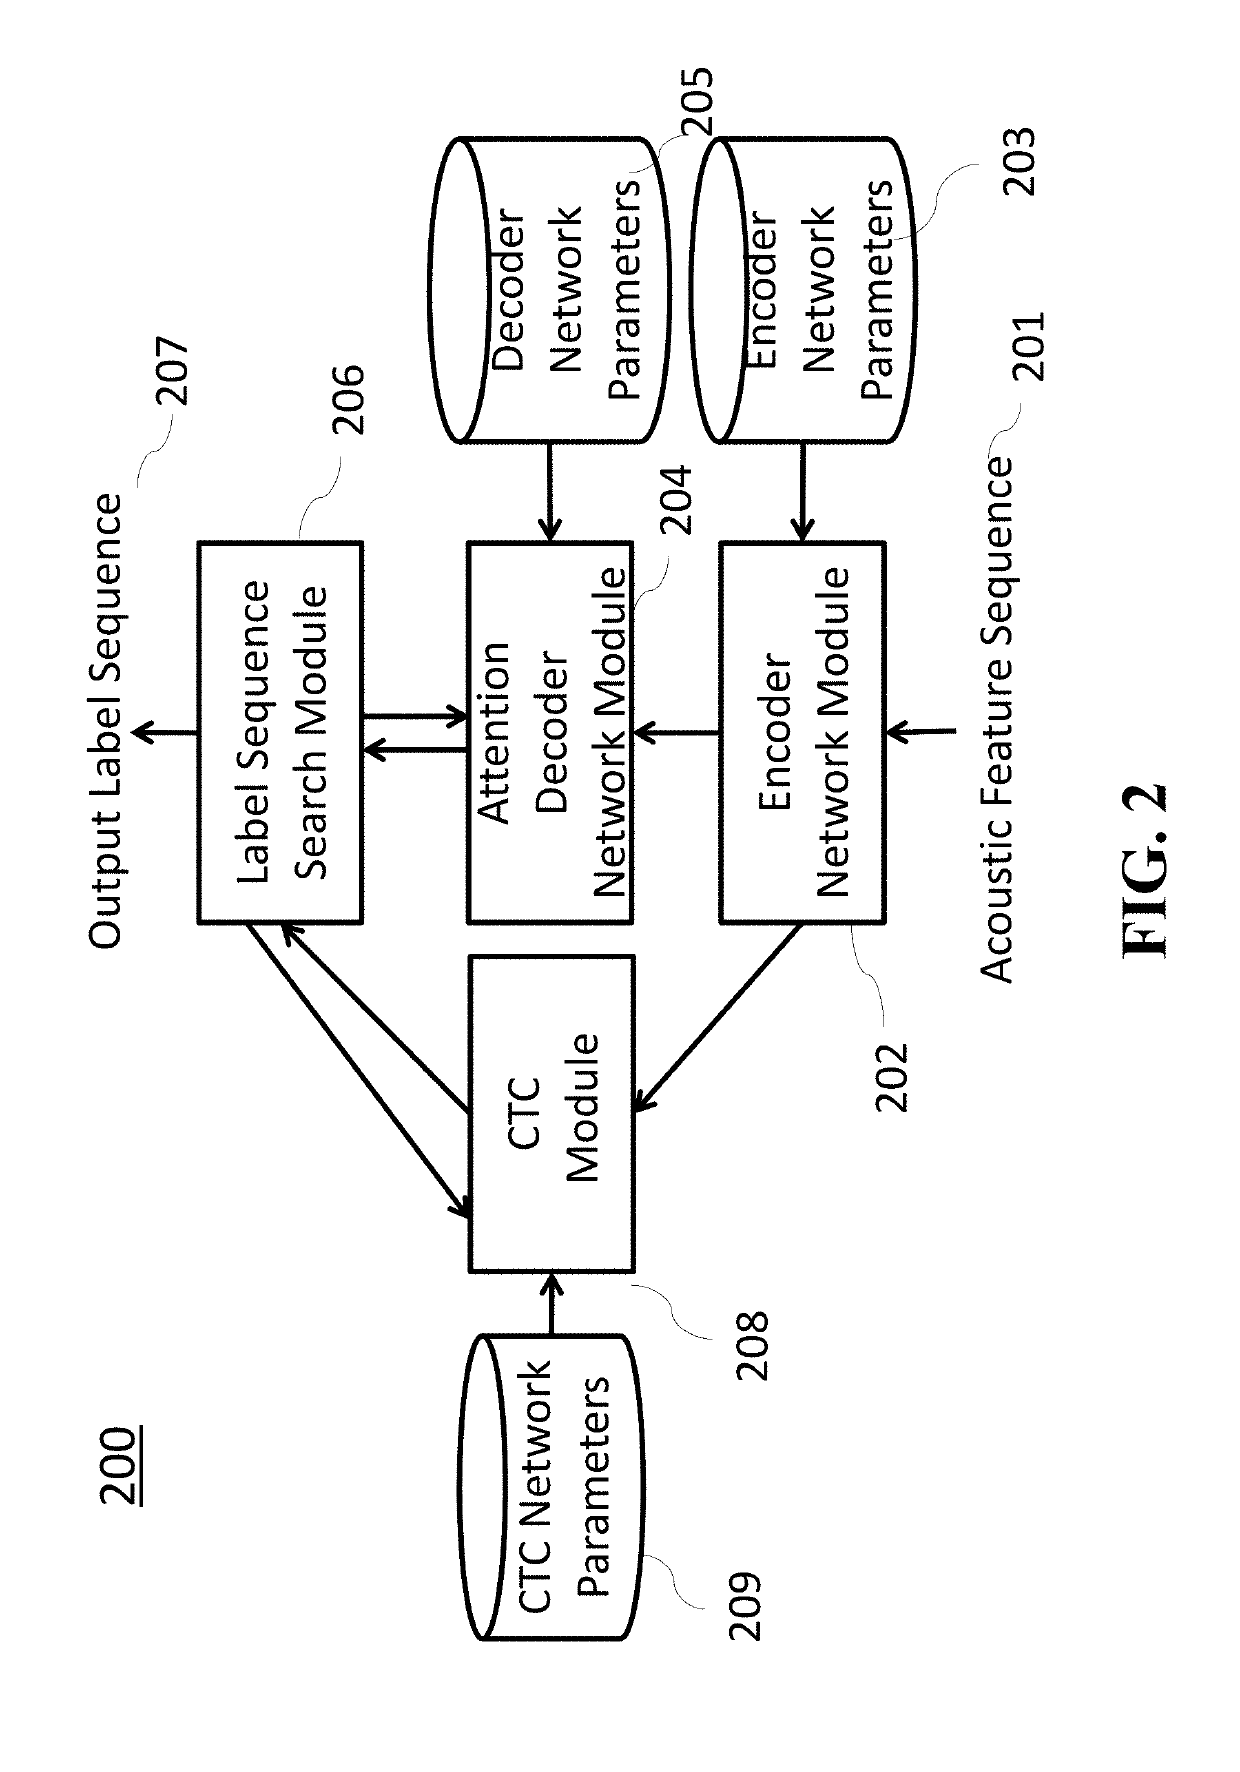 Method and Apparatus for Multi-Lingual End-to-End Speech Recognition